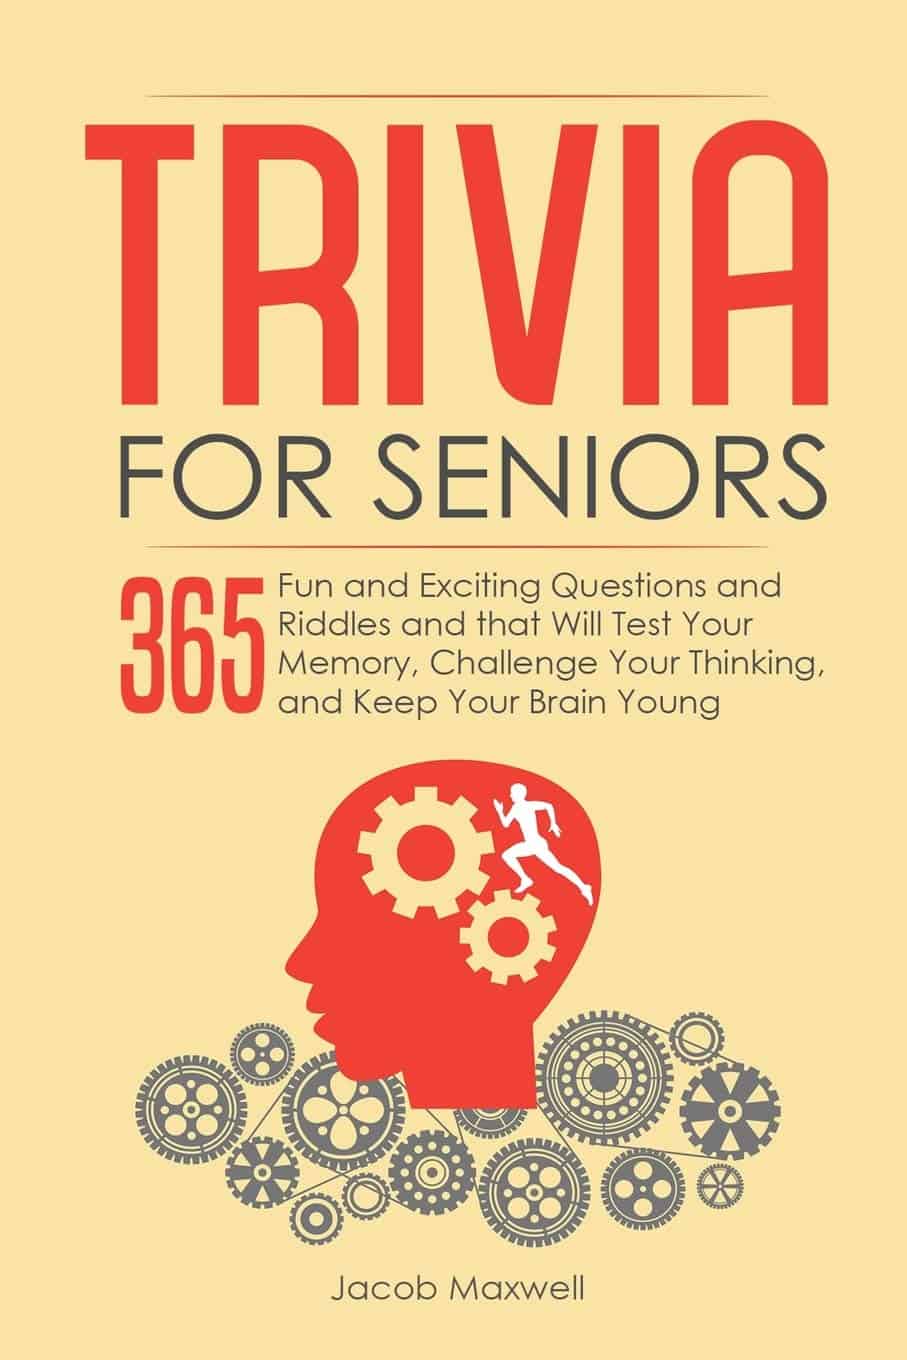 golden-age-trivia-trivia-for-seniors-trivia-questions-and-answers-senior-activities